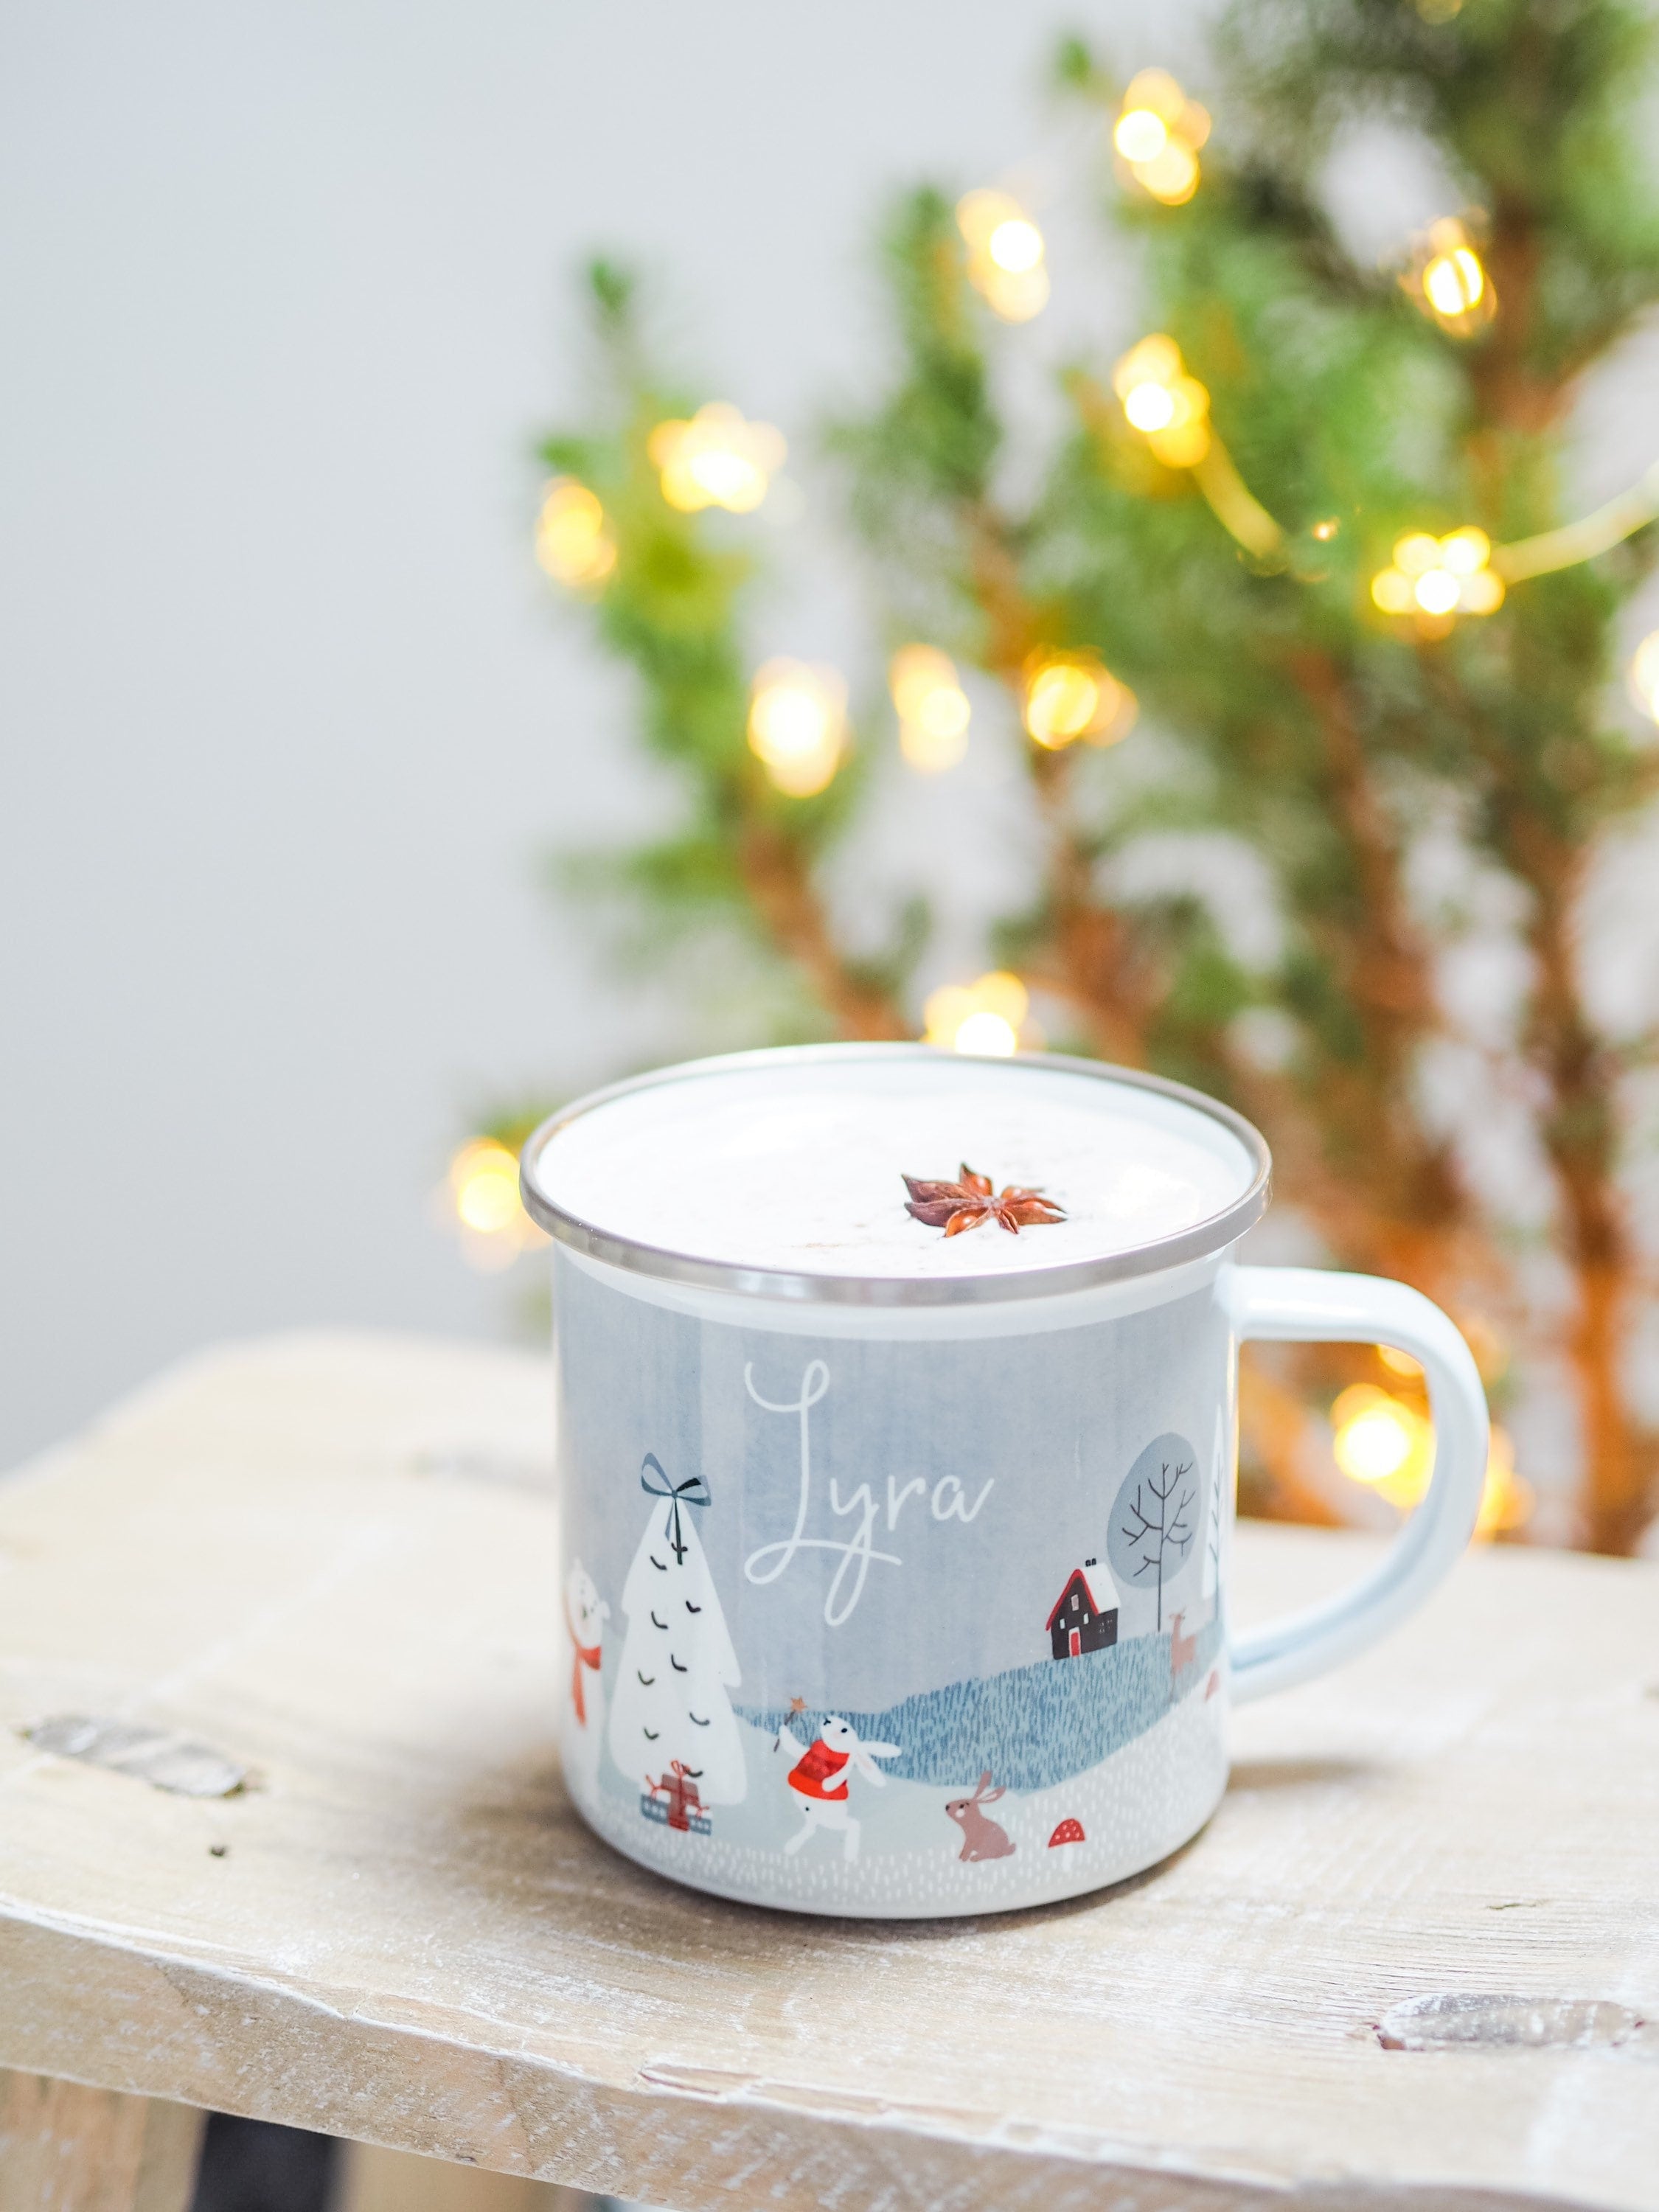 Stainless Steel Enamel Christmas Mug Decorated with Winter Mittens Design